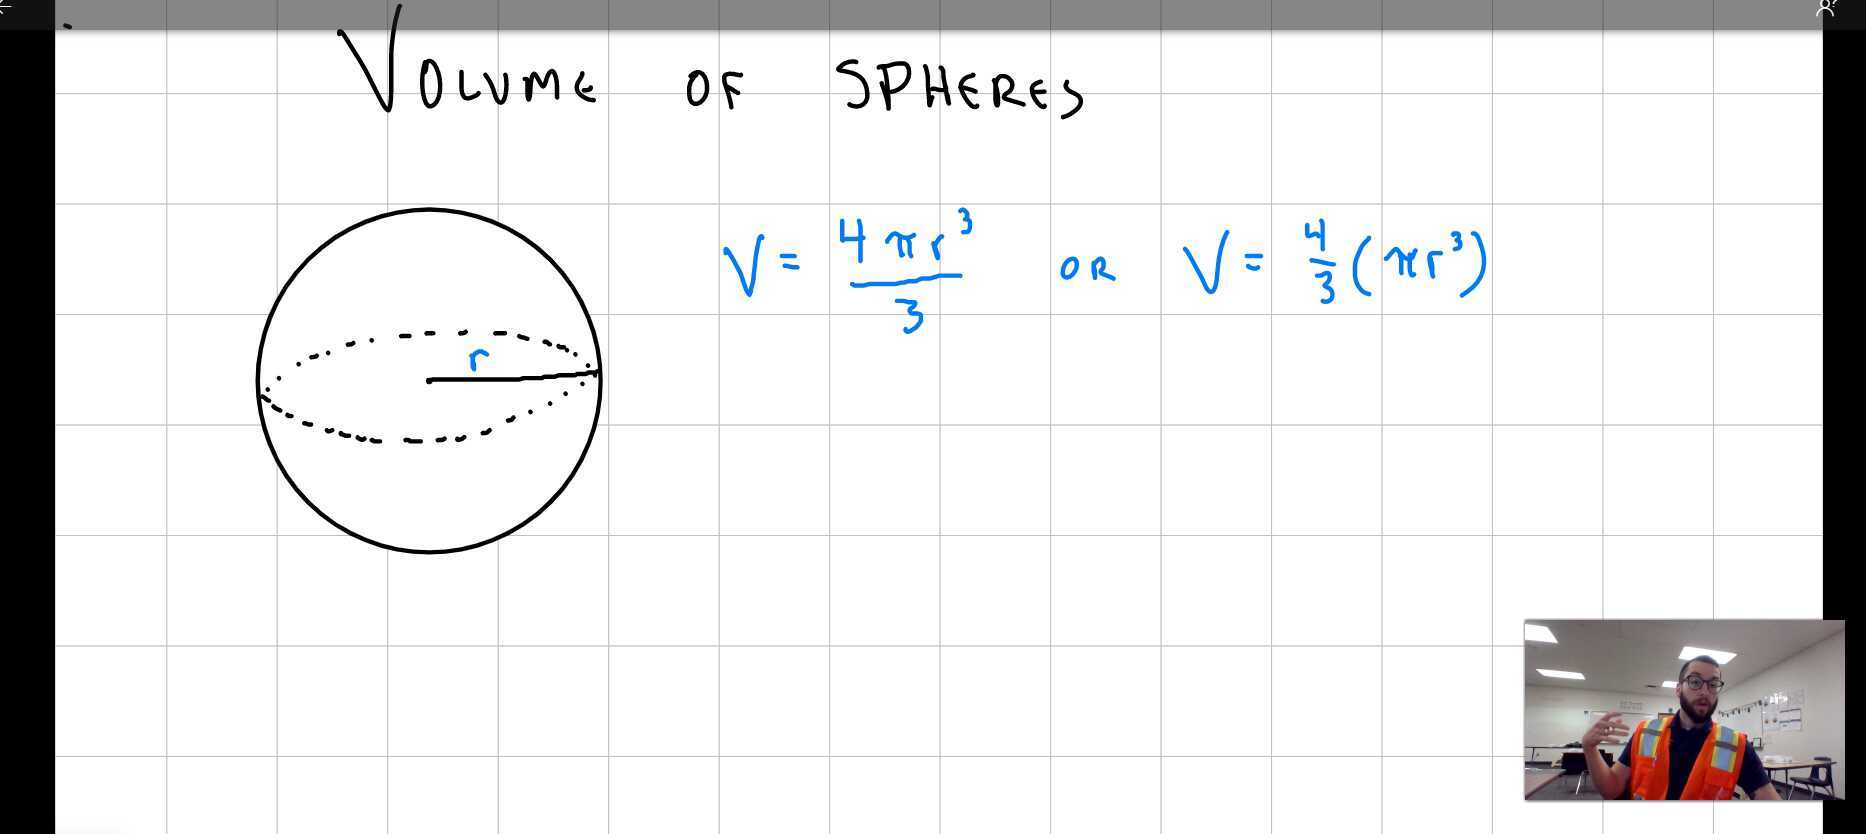 integrate to get volume of 4d sphere